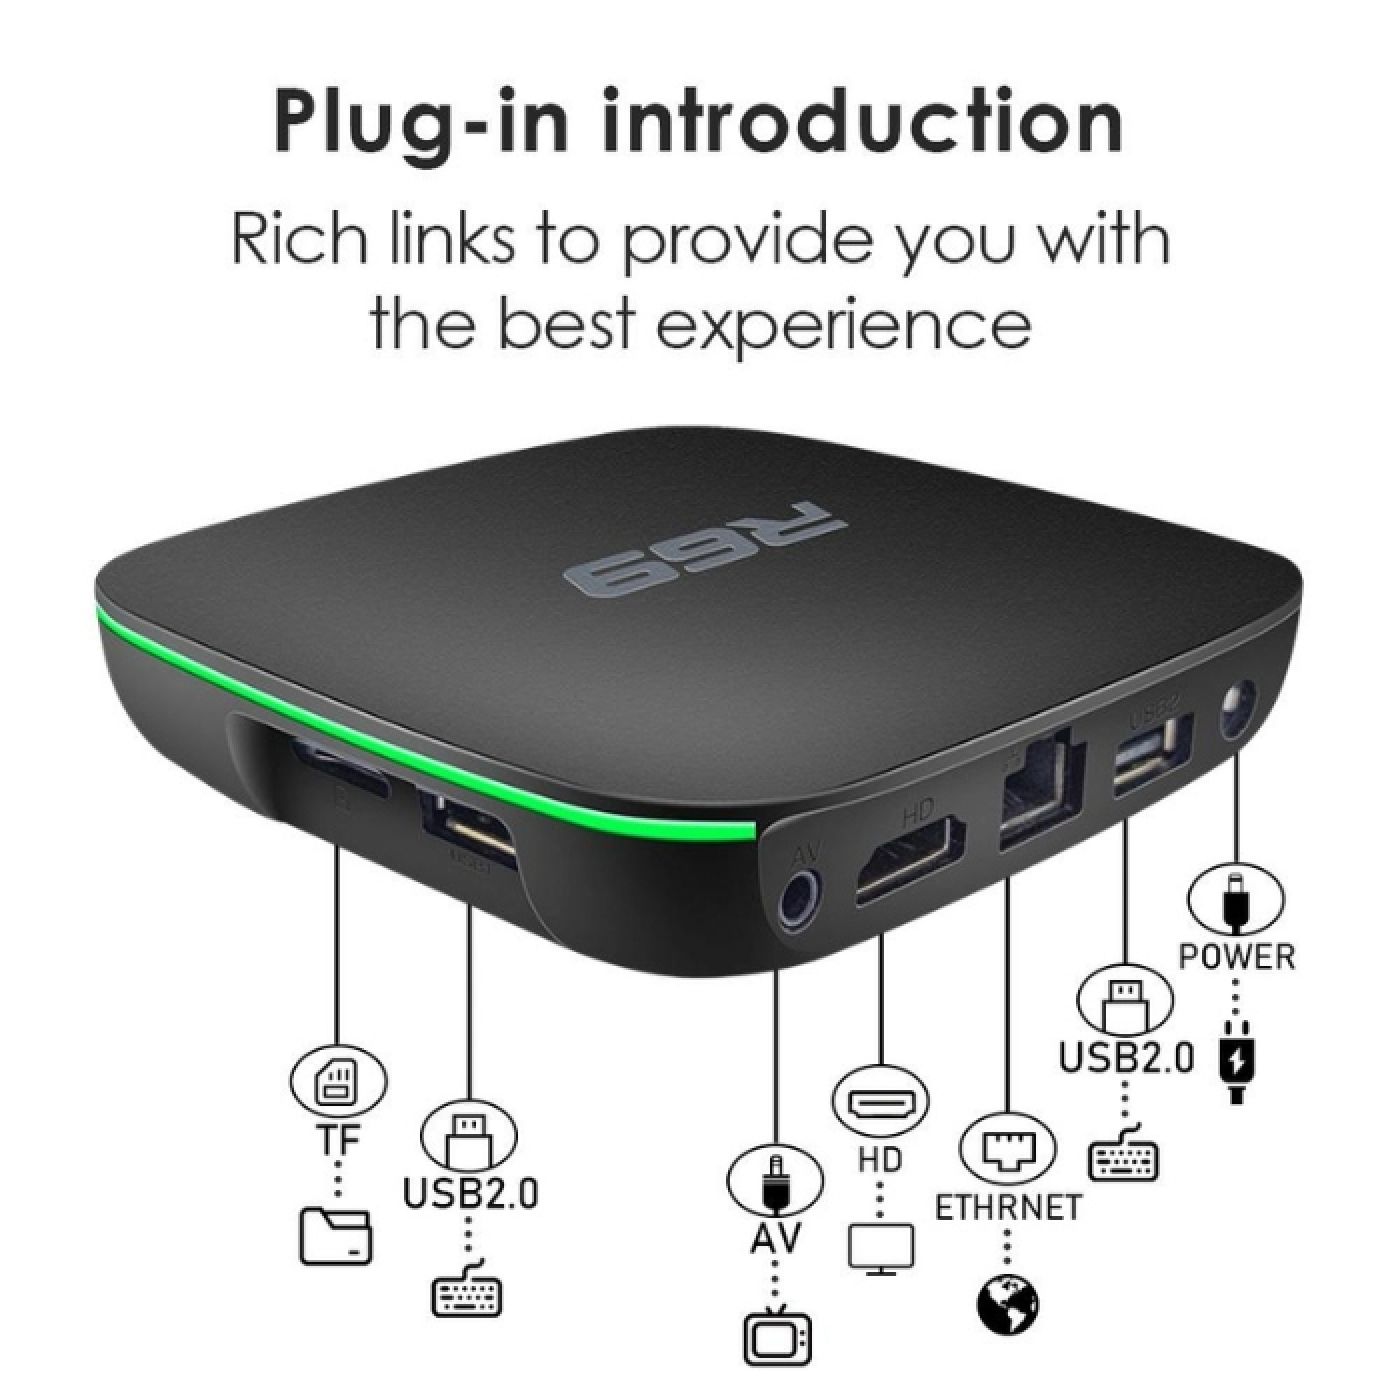 Android TV Box R69 Android 7, 1G RAM DDR3, full box